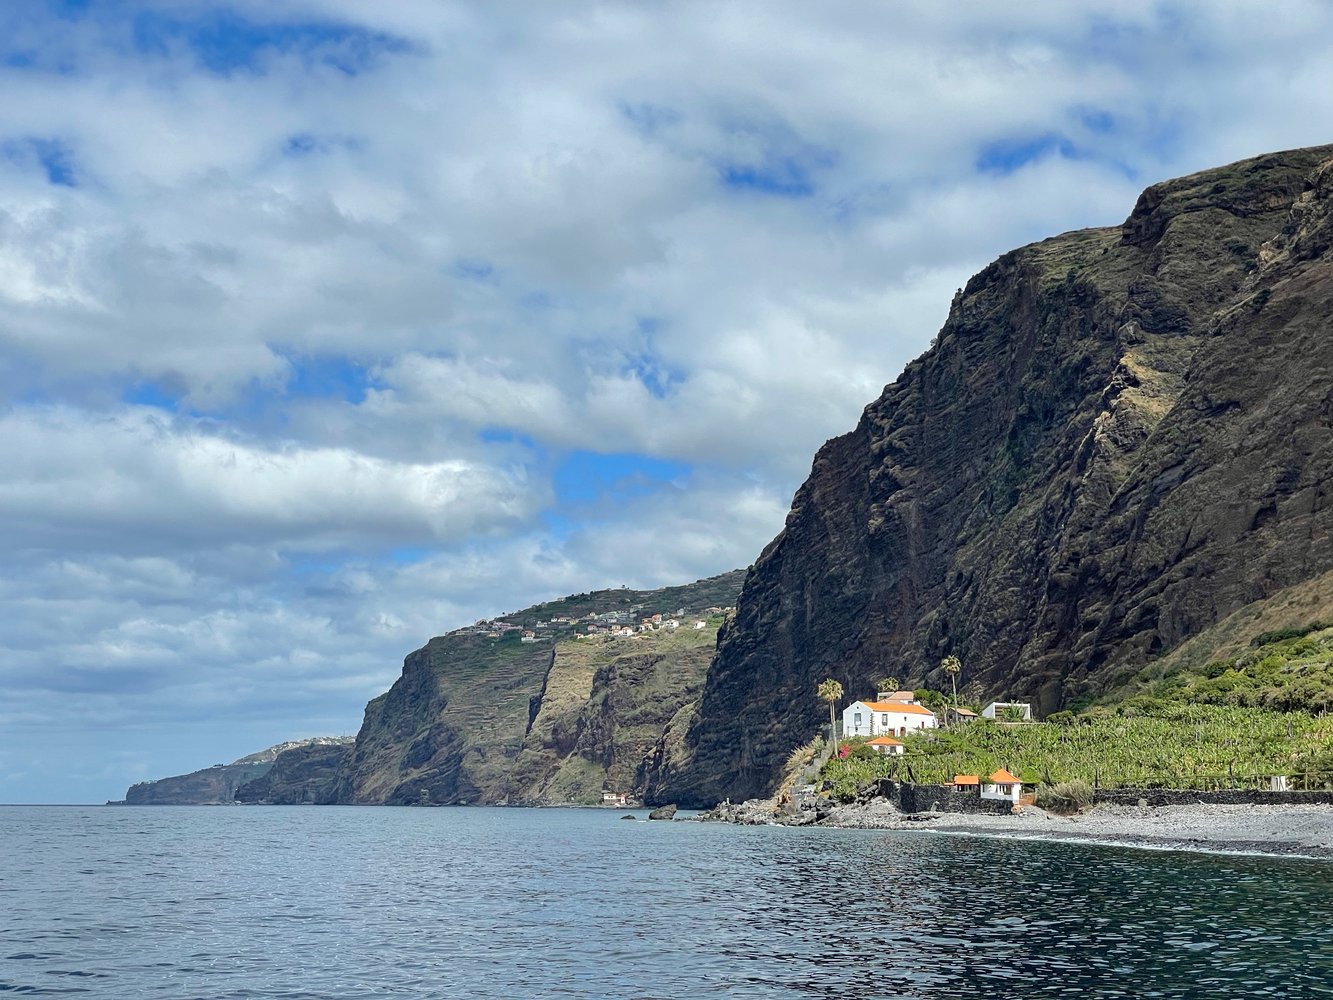 Cliffs and beach-side vineyards in Madeira